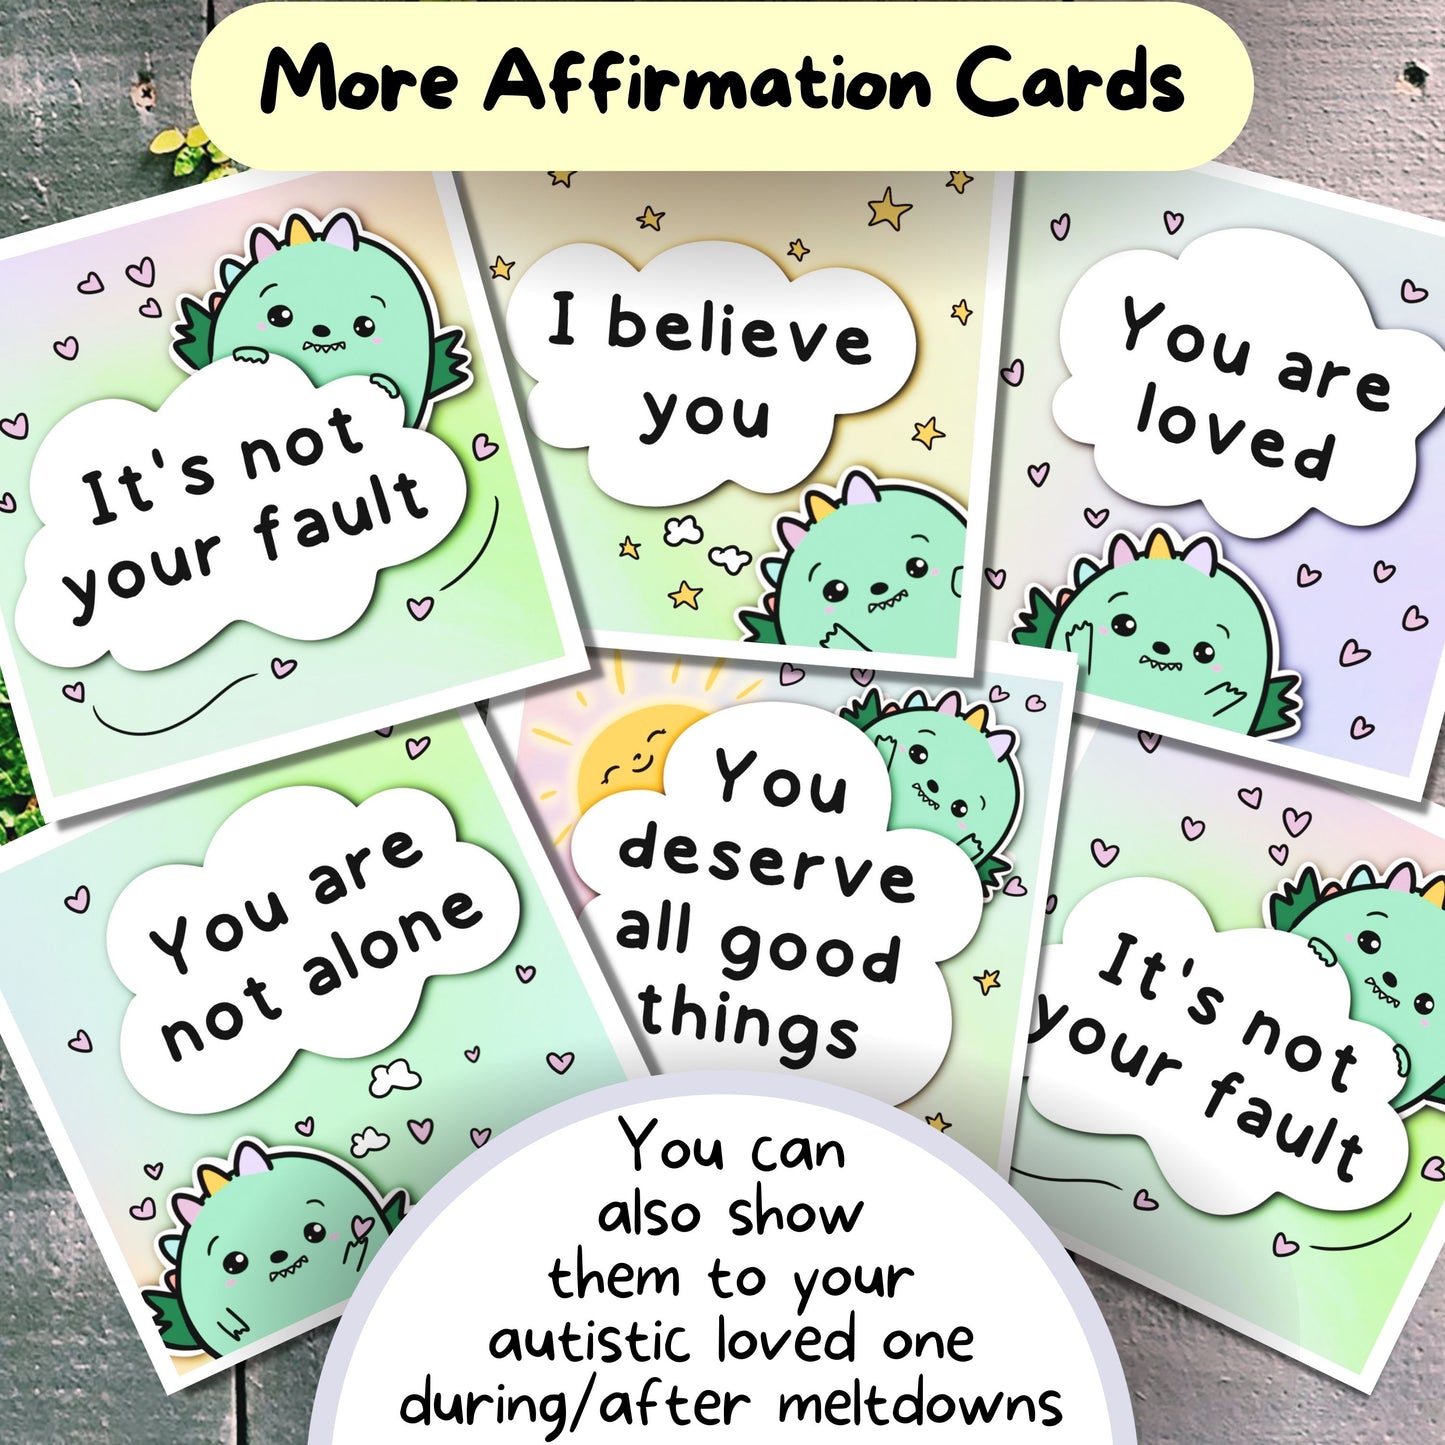 Communication Cards & Affirmation Cards (Digital) ft. Kex, the Dinosaur - Personal Use